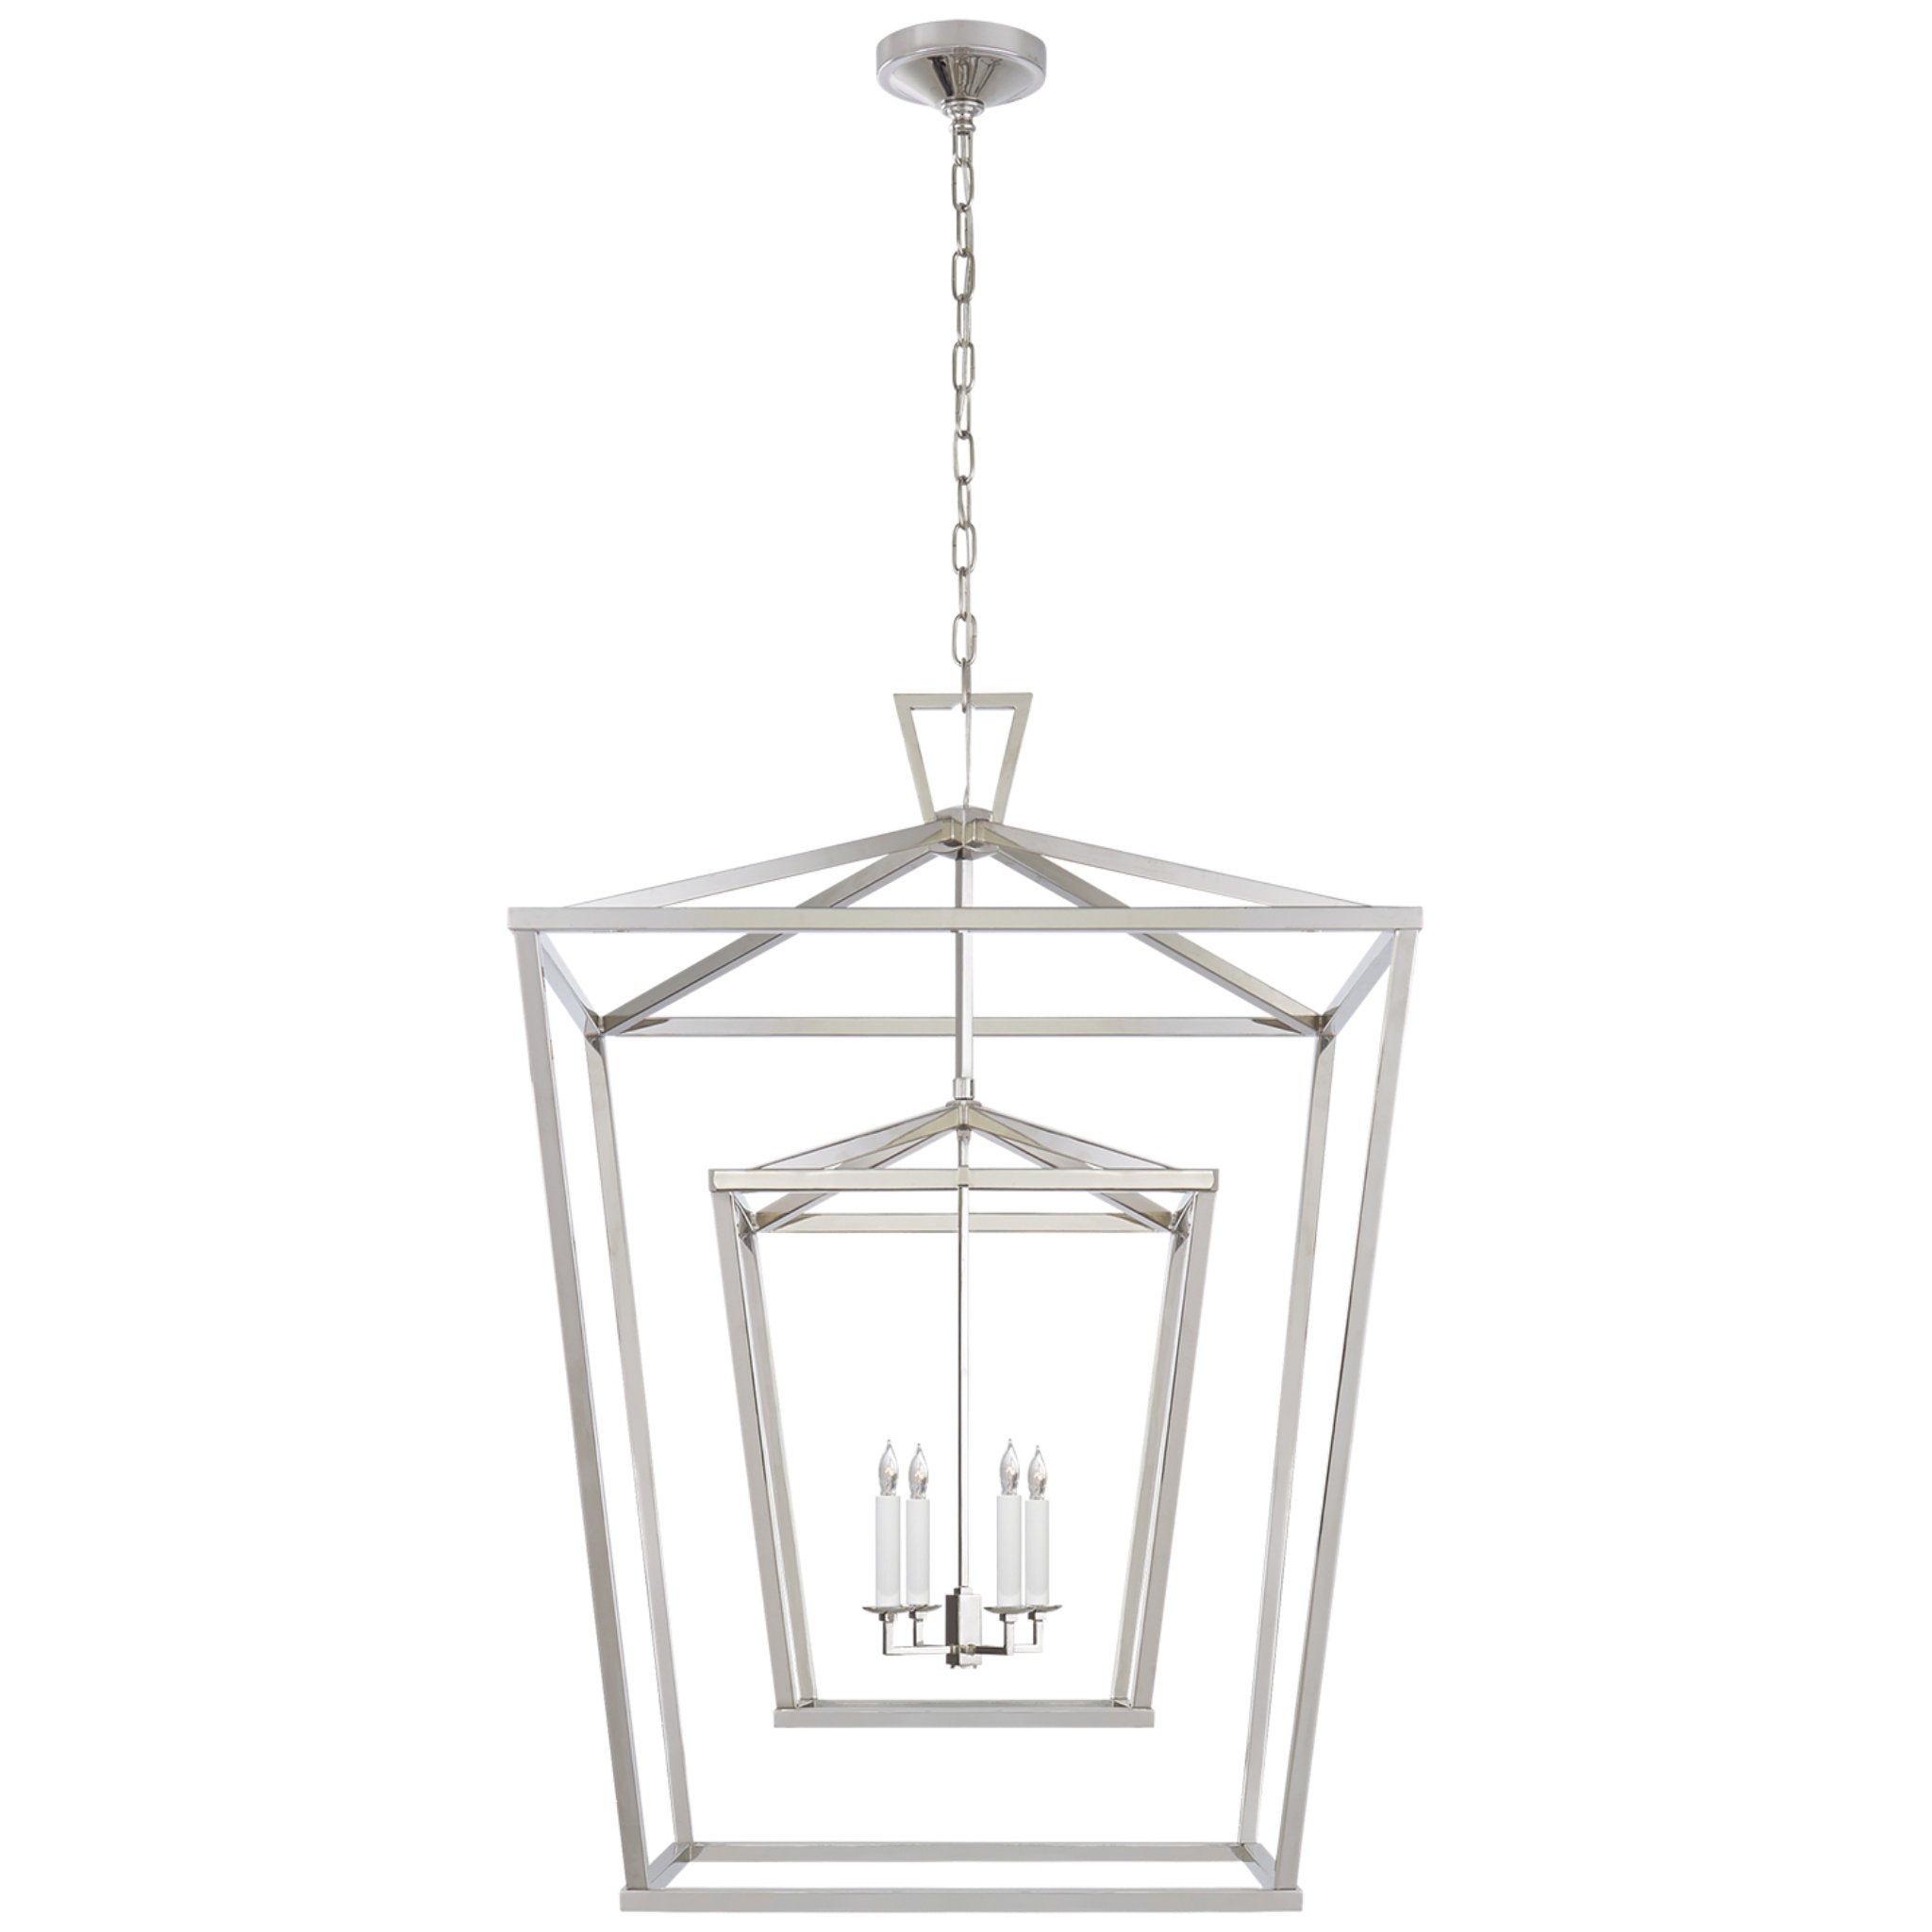 Chapman & Myers Darlana Extra Large Double Cage Lantern in Polished Nickel